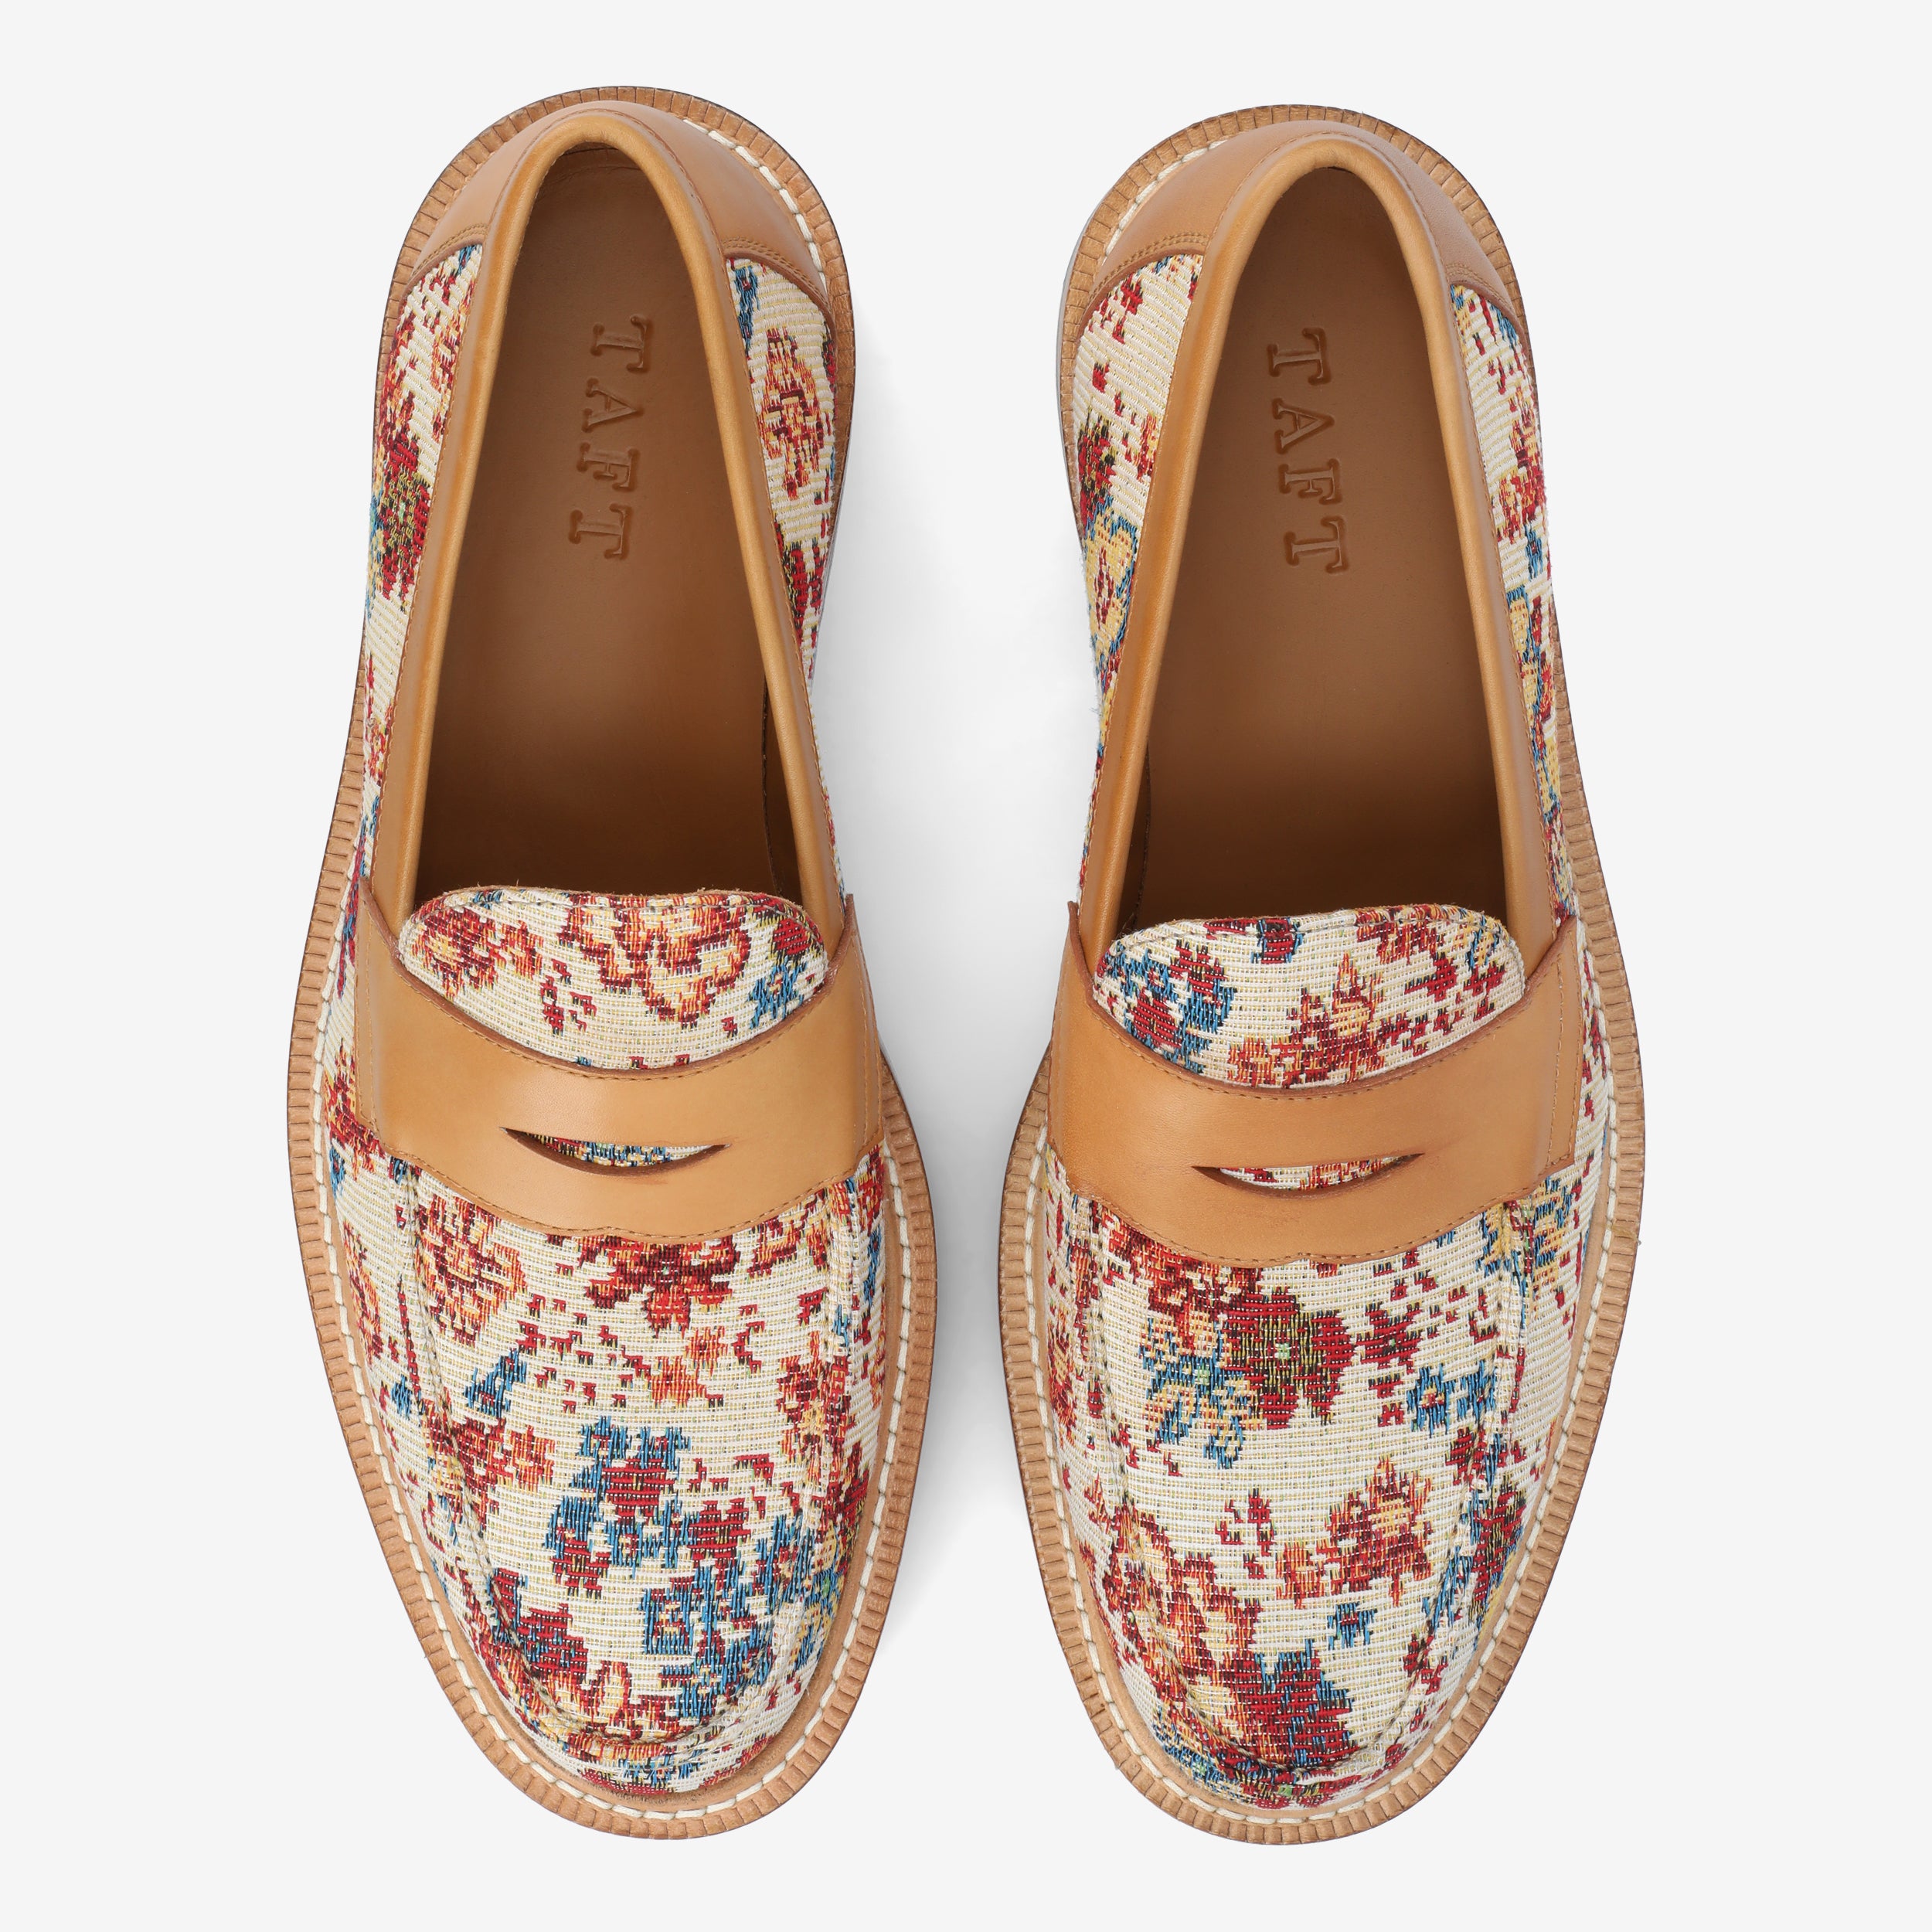 The Fitz Loafer in Florence